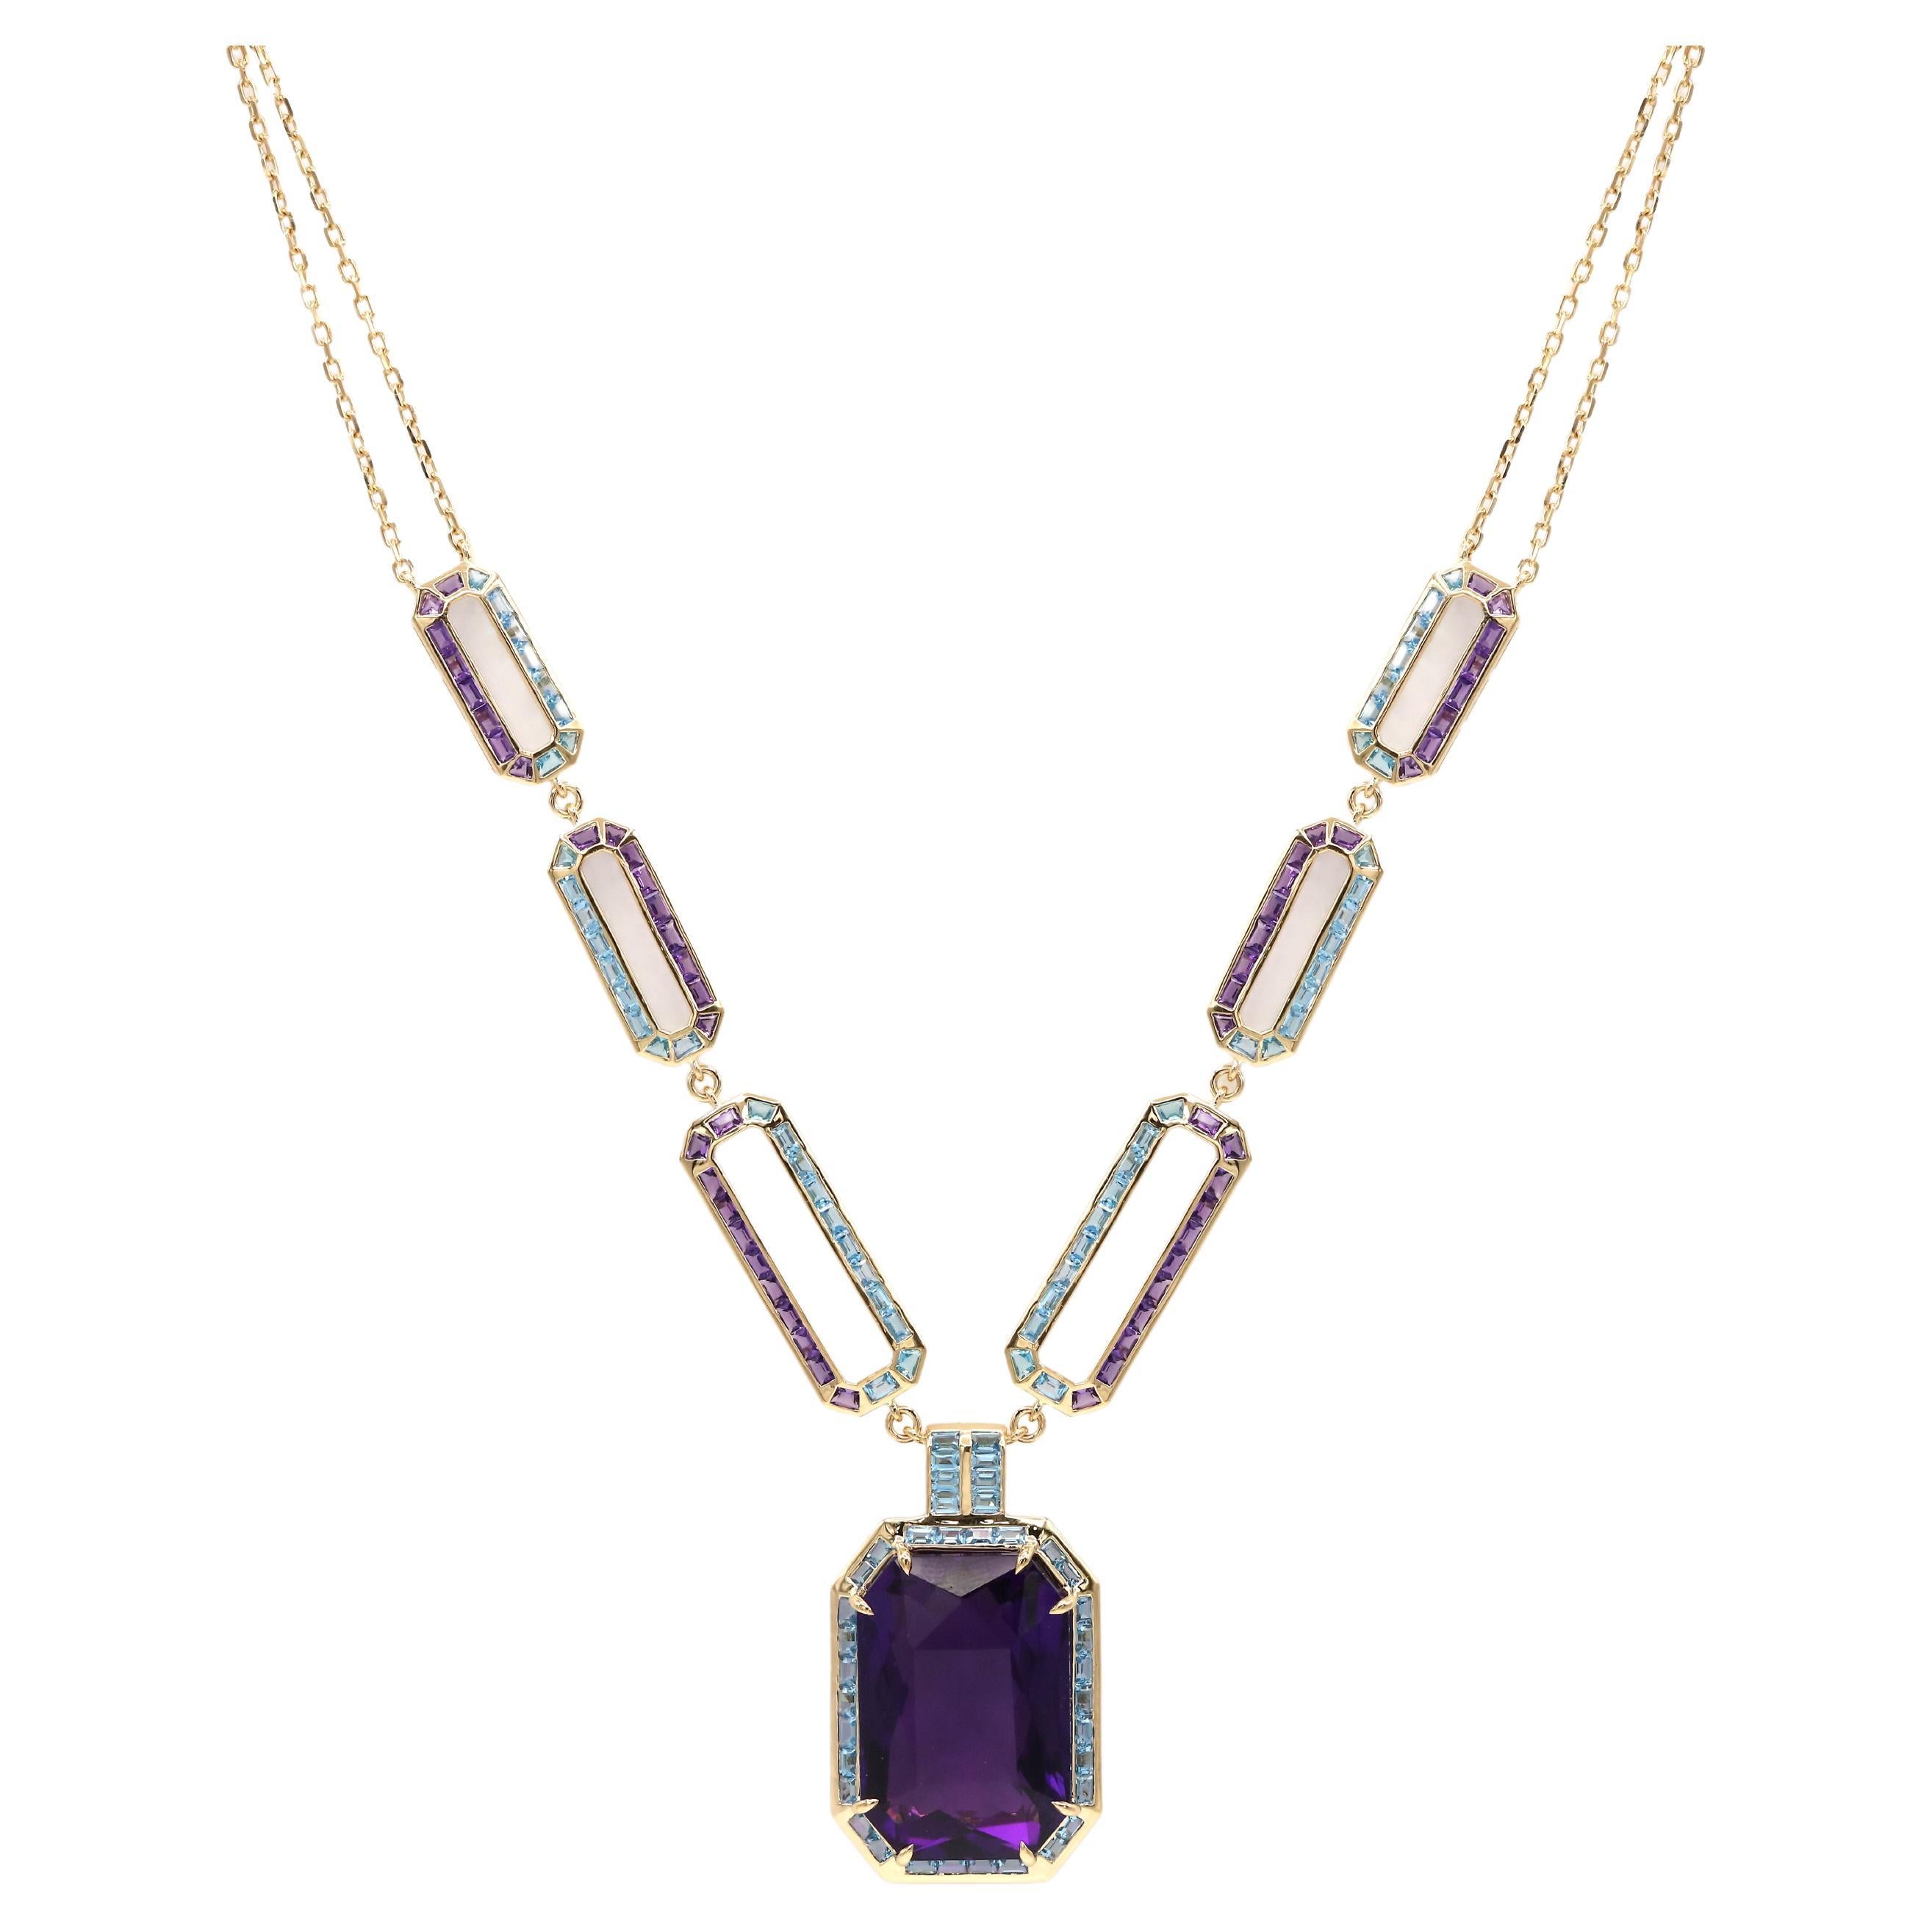 79.26 Ct Blue Topaz Amethyst 18 K Yellow Gold Cocktail Pendant Necklace For Sale